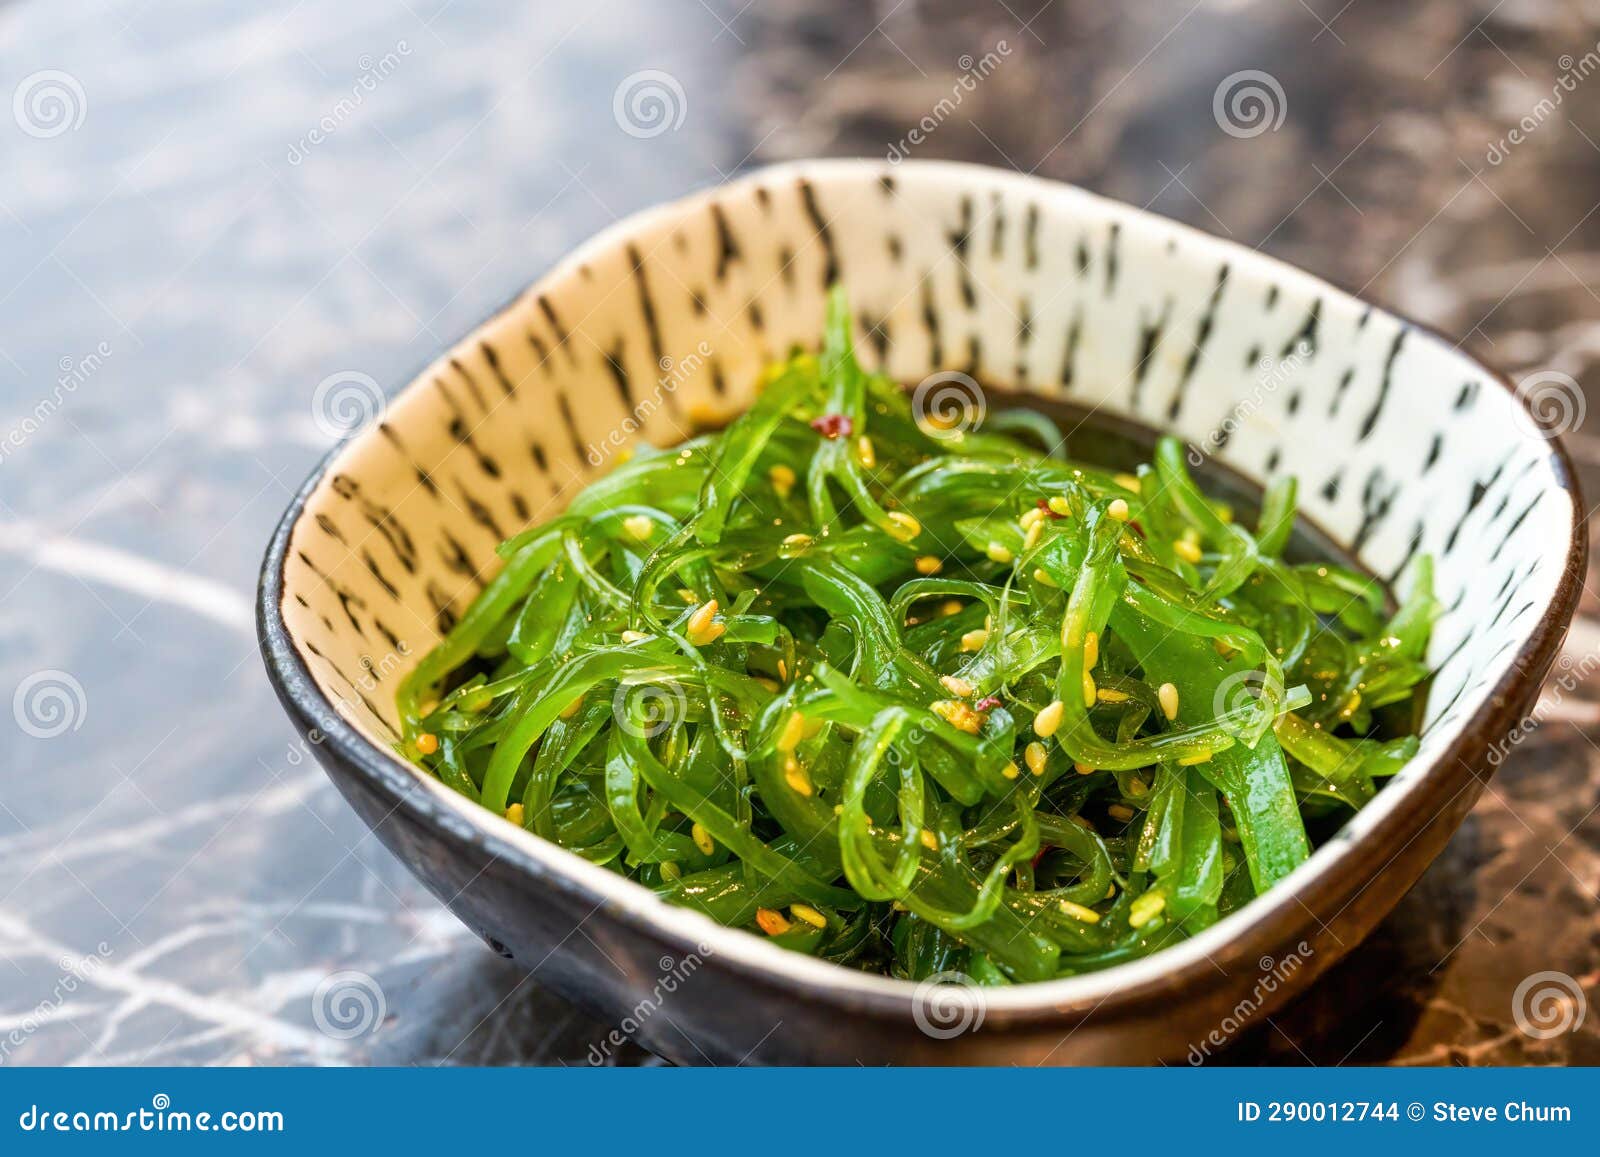 A Delicious Japanese Dish with Cold Chinese Seaweed Stock Photo